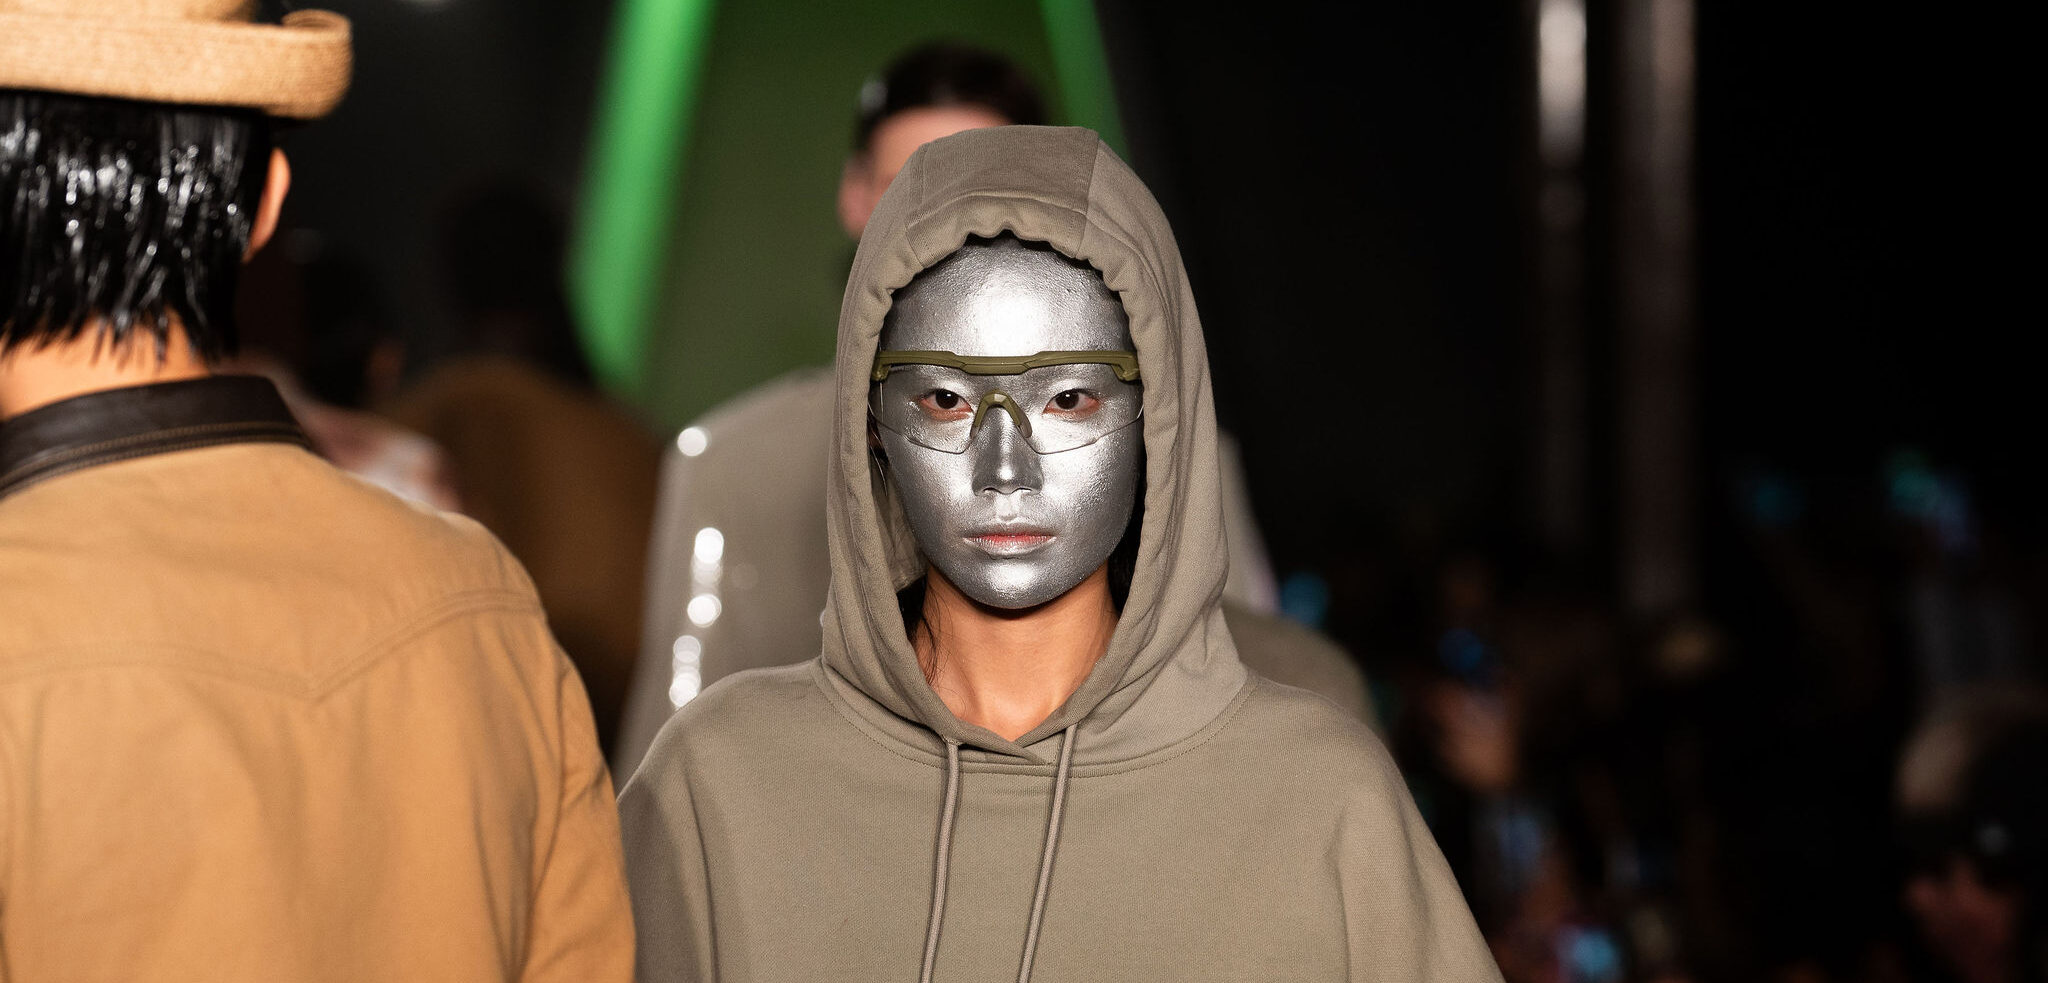 A model wearing a hooded garment with a metallic silver mask covering the face walks the runway at New York Fashion Week, reflecting PRIVATE POLICY's FW24 'Wild Wild World' collection theme that combines futuristic elements with Wild West inspirations.